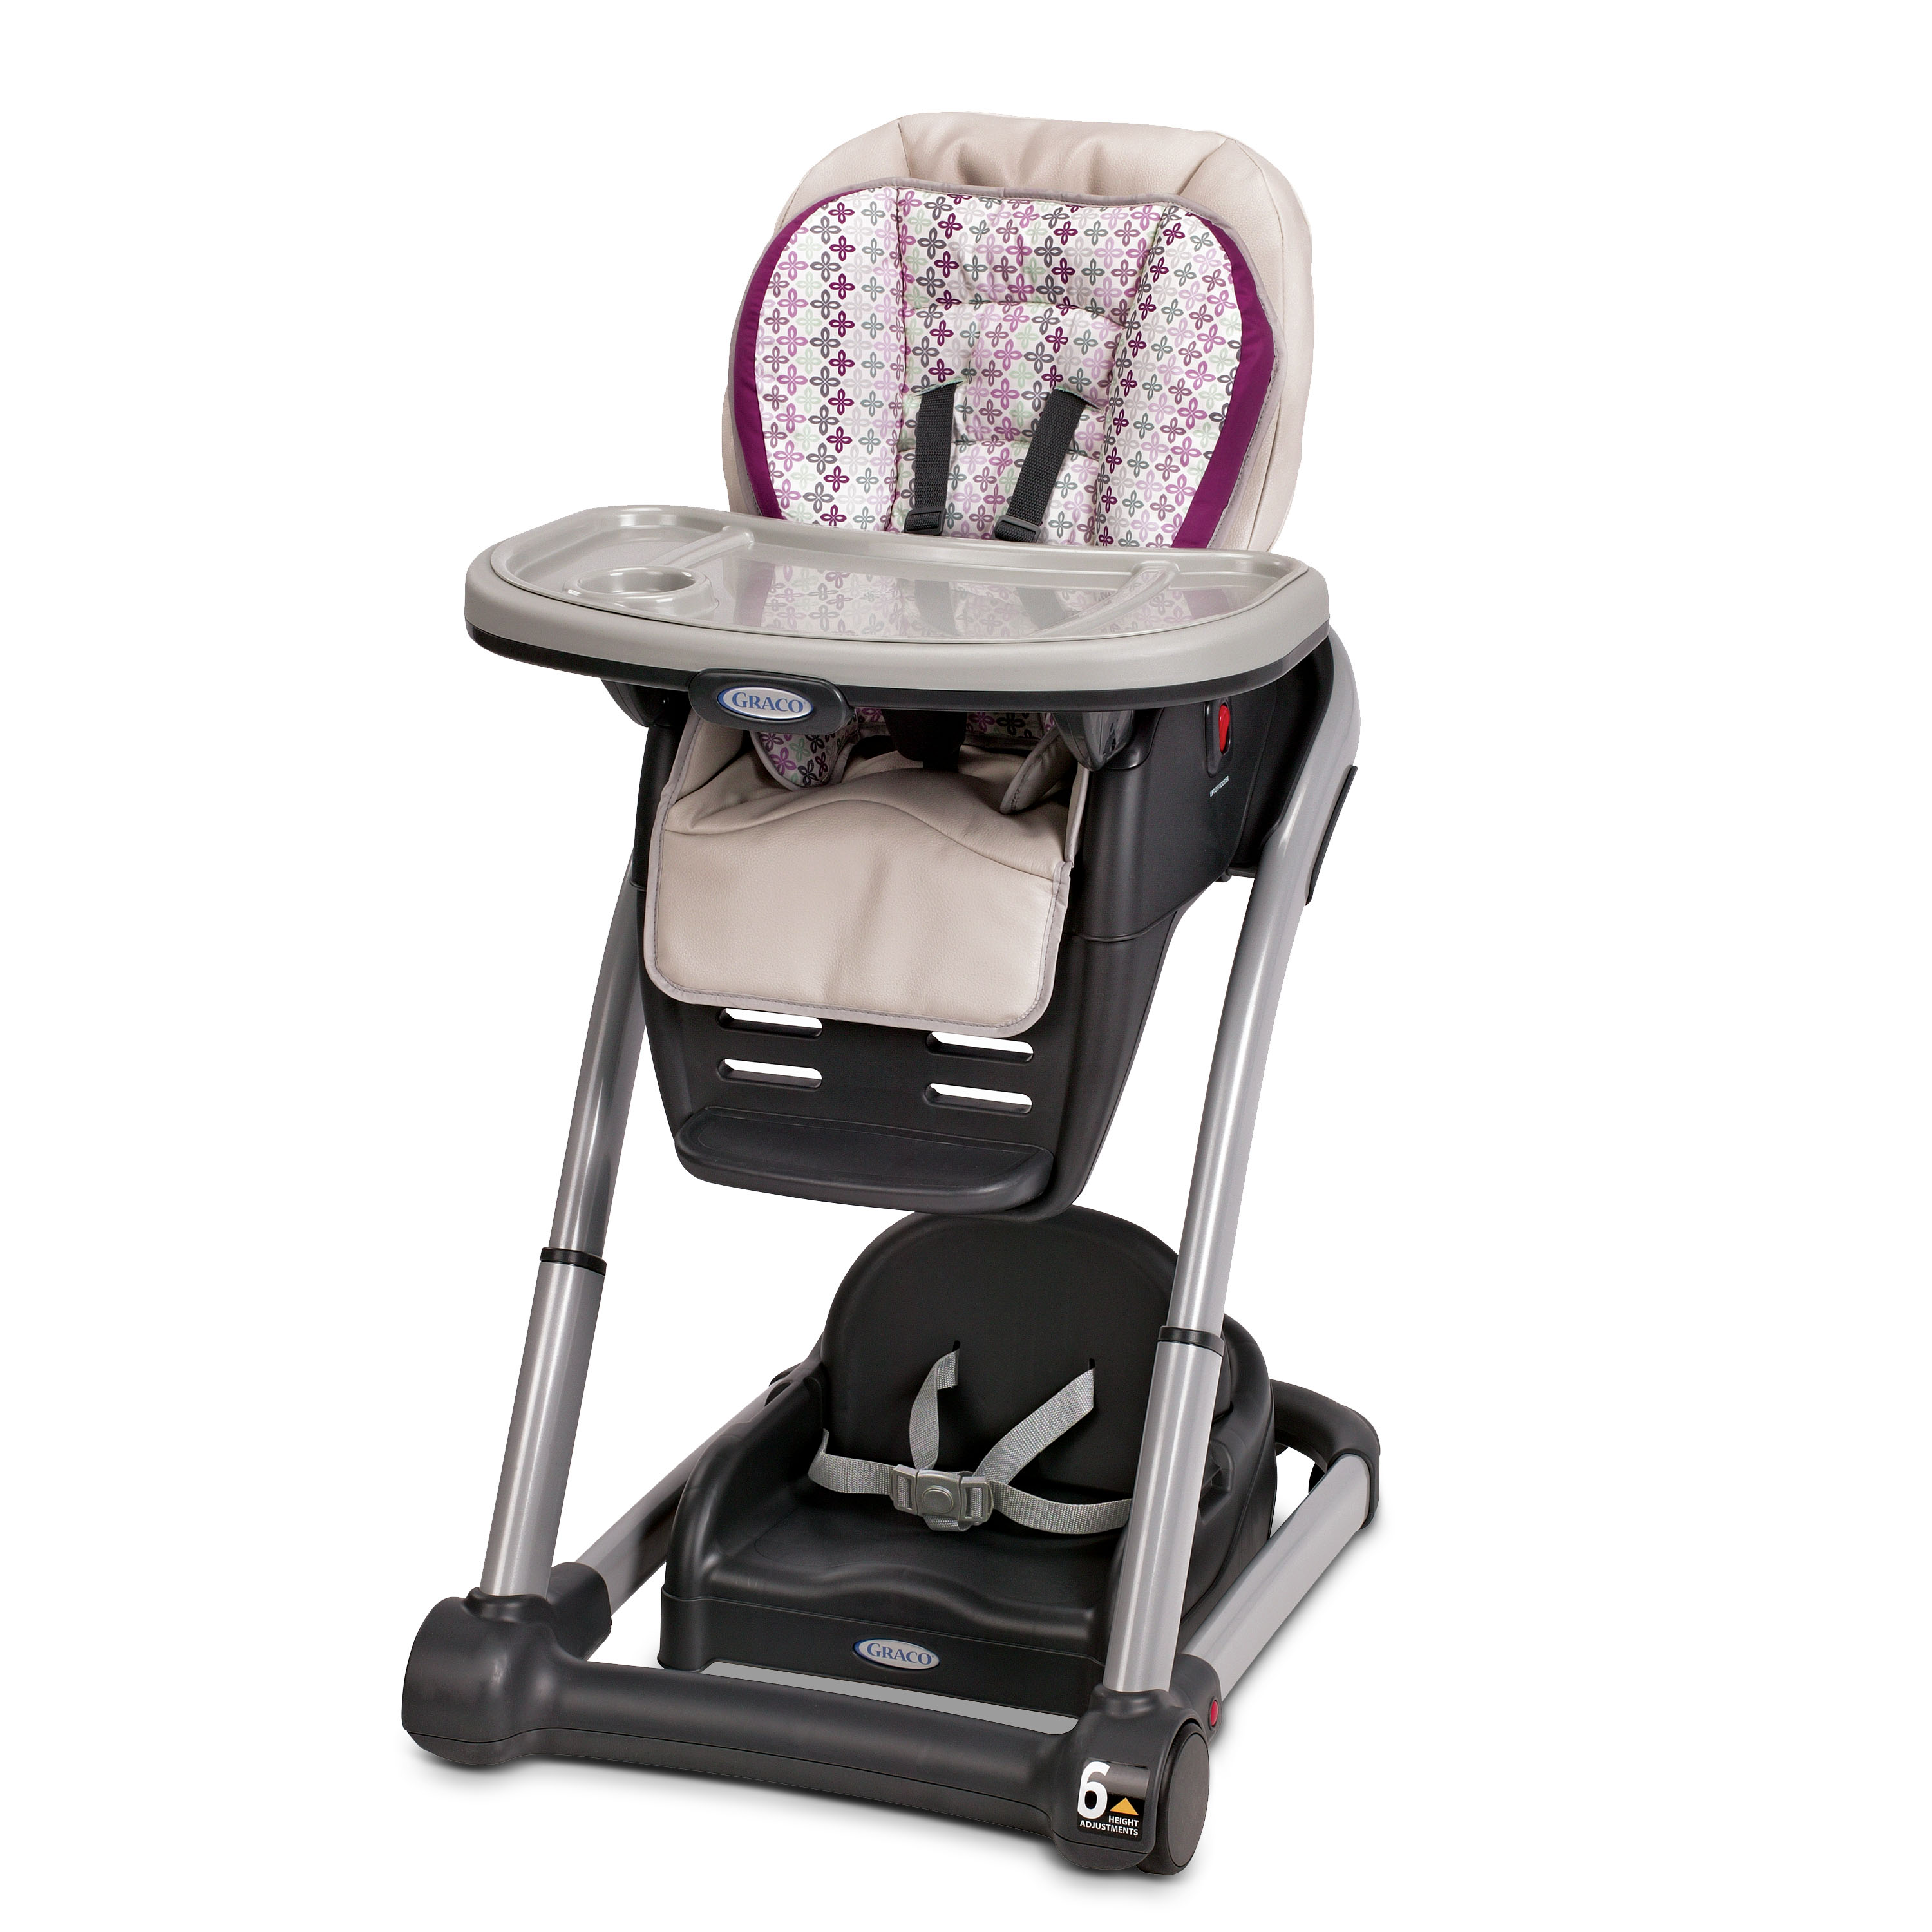 Graco Blossom™ 6-in-1 Convertible Highchair, Nyssa - image 1 of 6